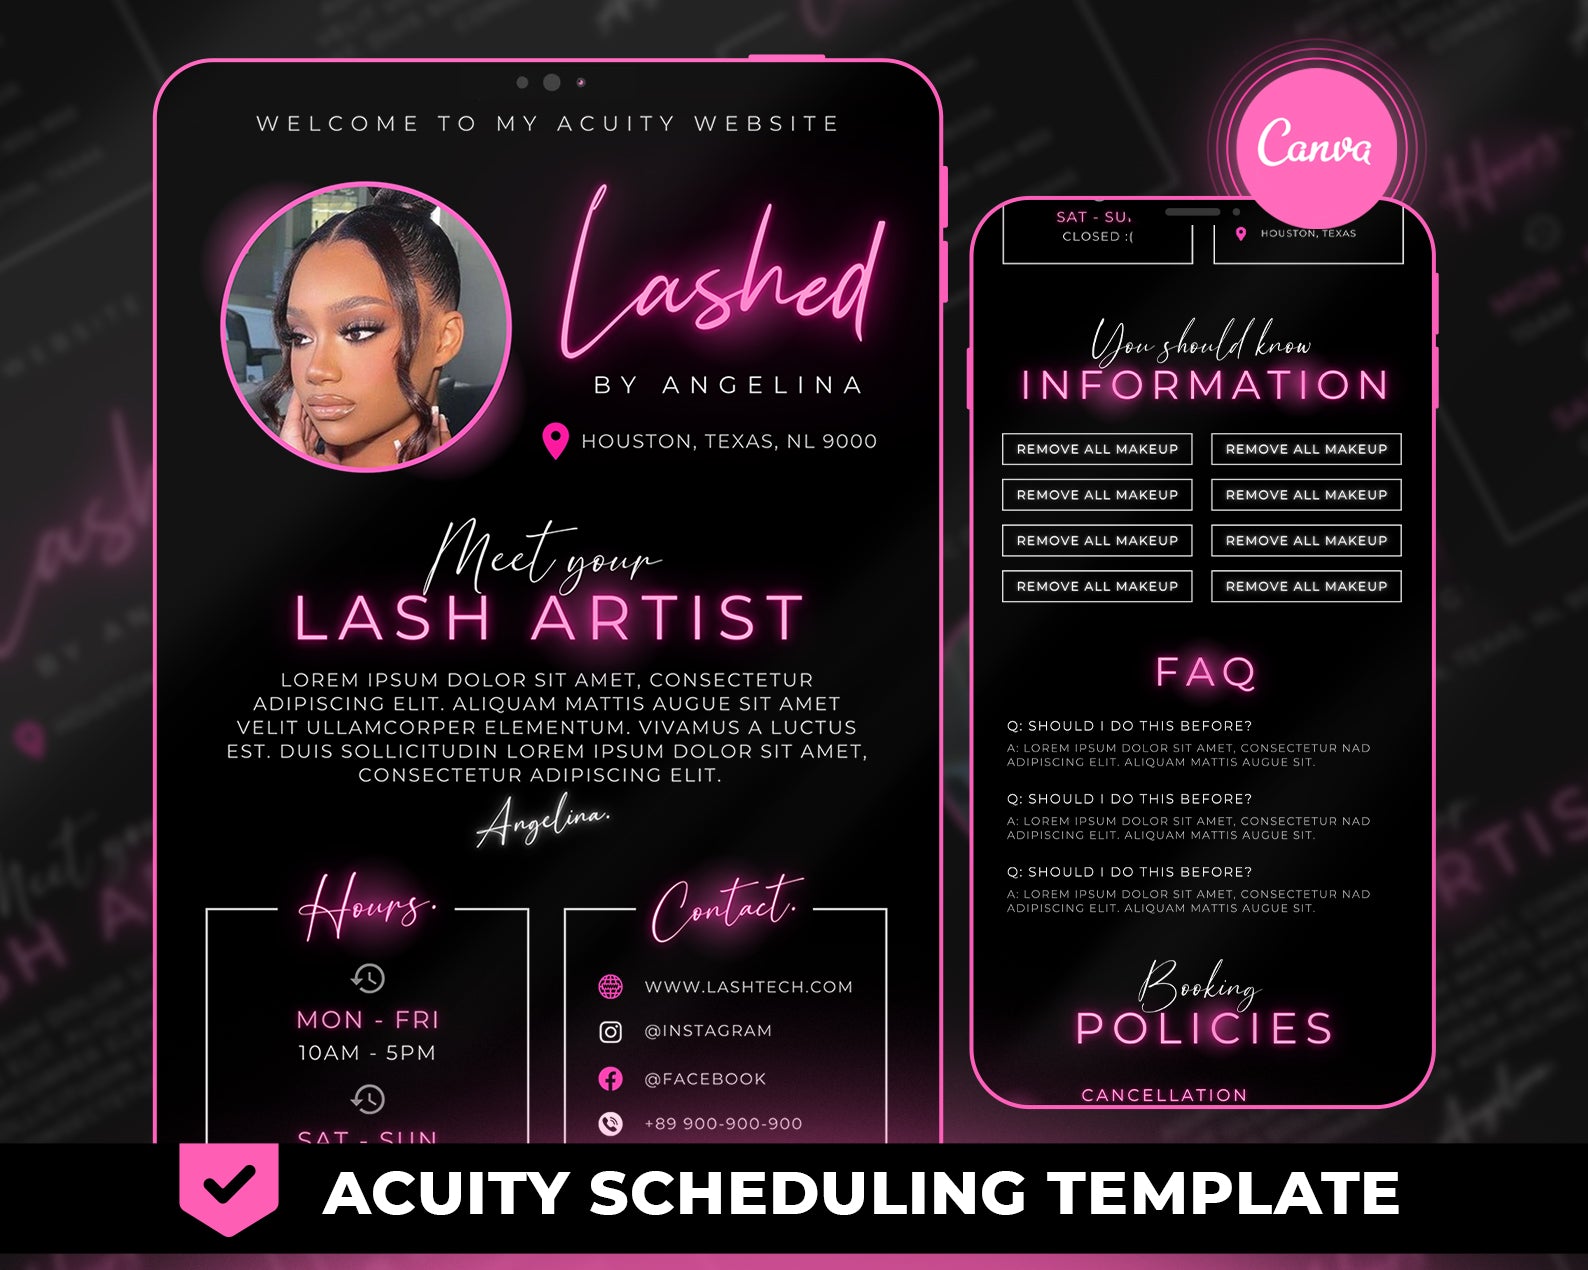 Acuity Scheduling, Lash Artist, Canva Template